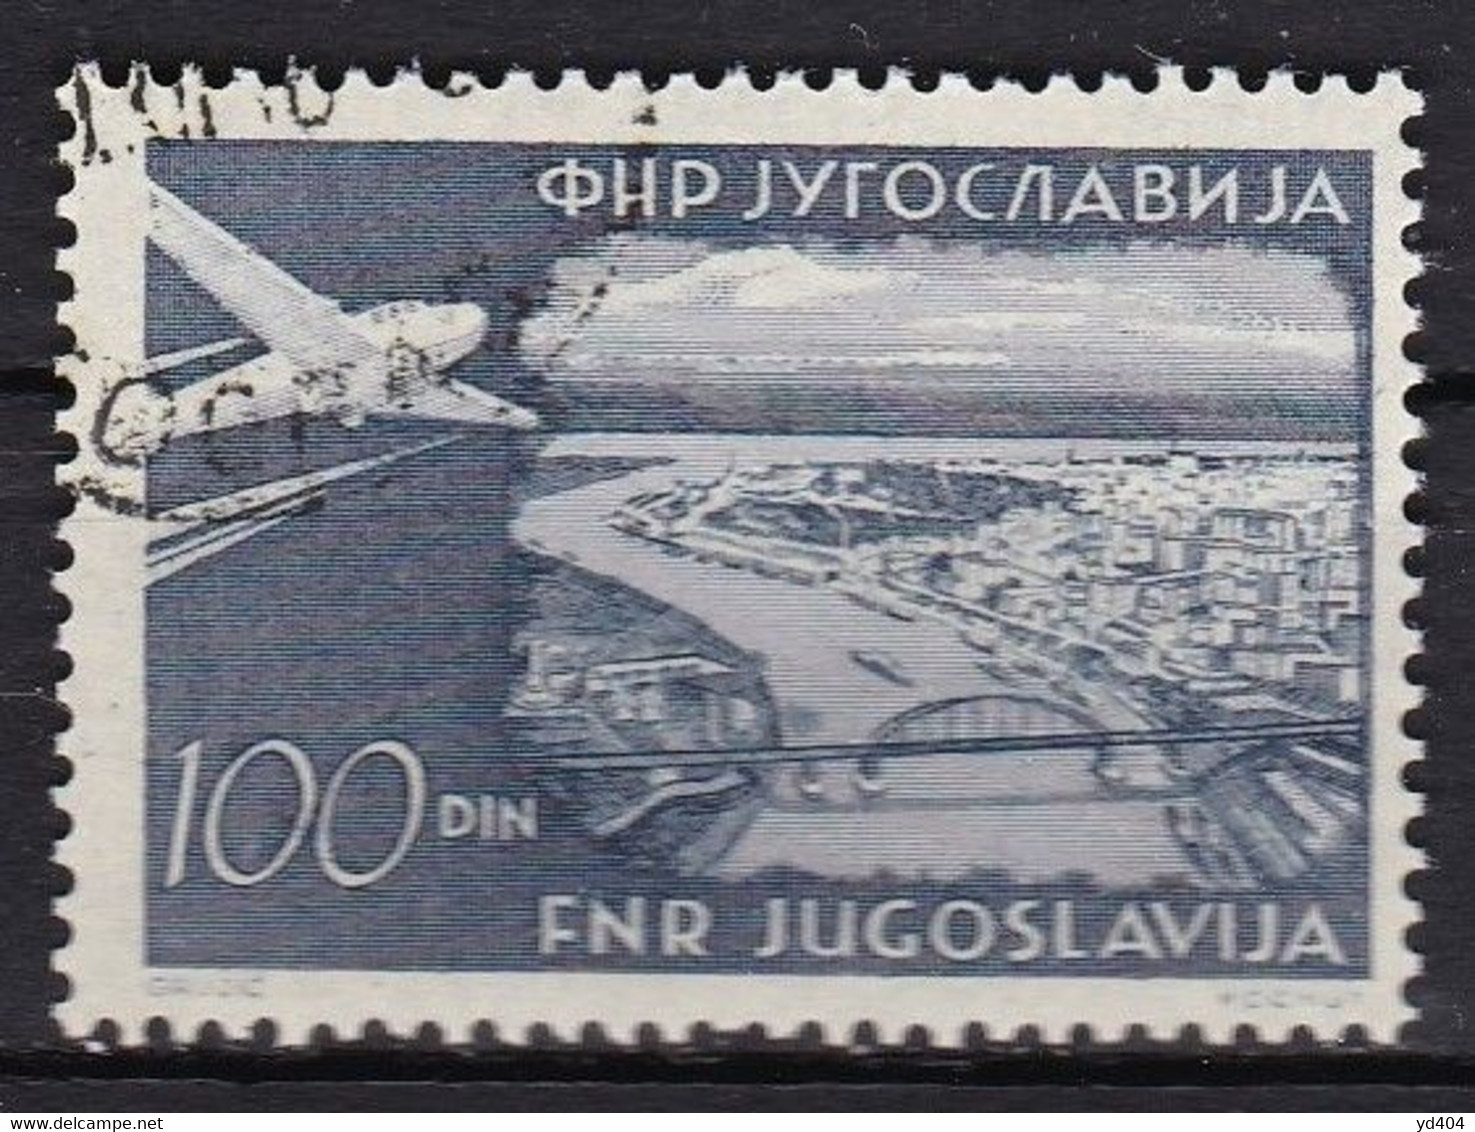 YU409 – YOUGOSLAVIA – AIRMAIL – 1951 – PLANE OVER BELGRADE – Y&T # 40 USED 22 € - Aéreo